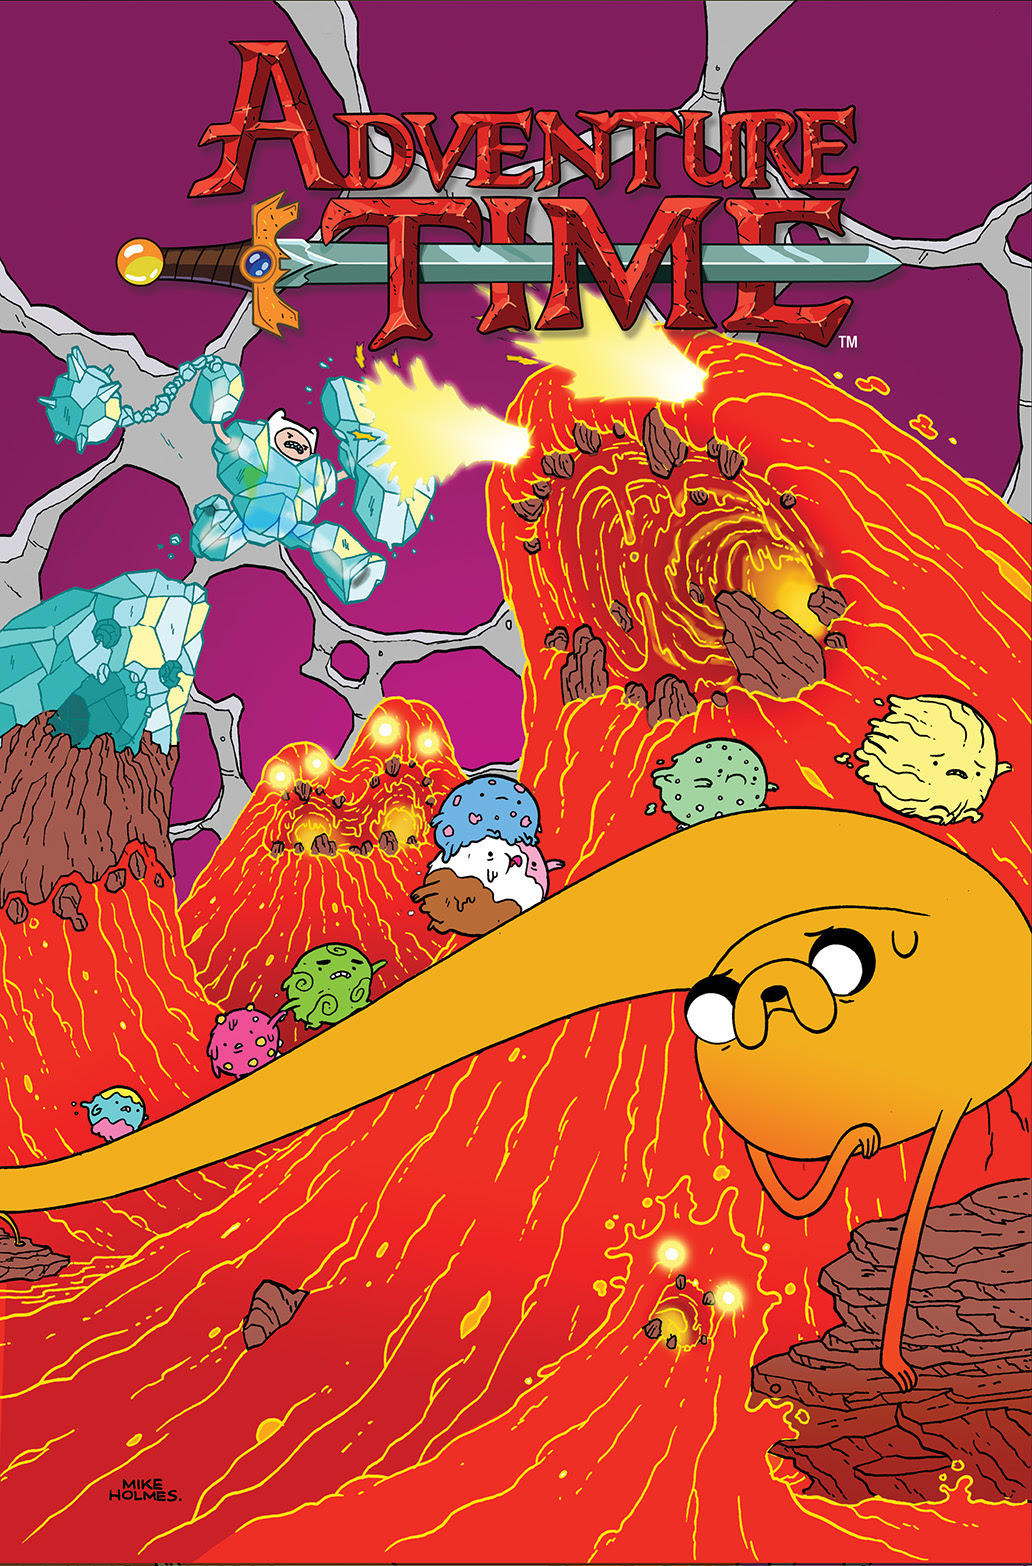 ADVENTURE TIME #29 Cover A by Mike Holmes